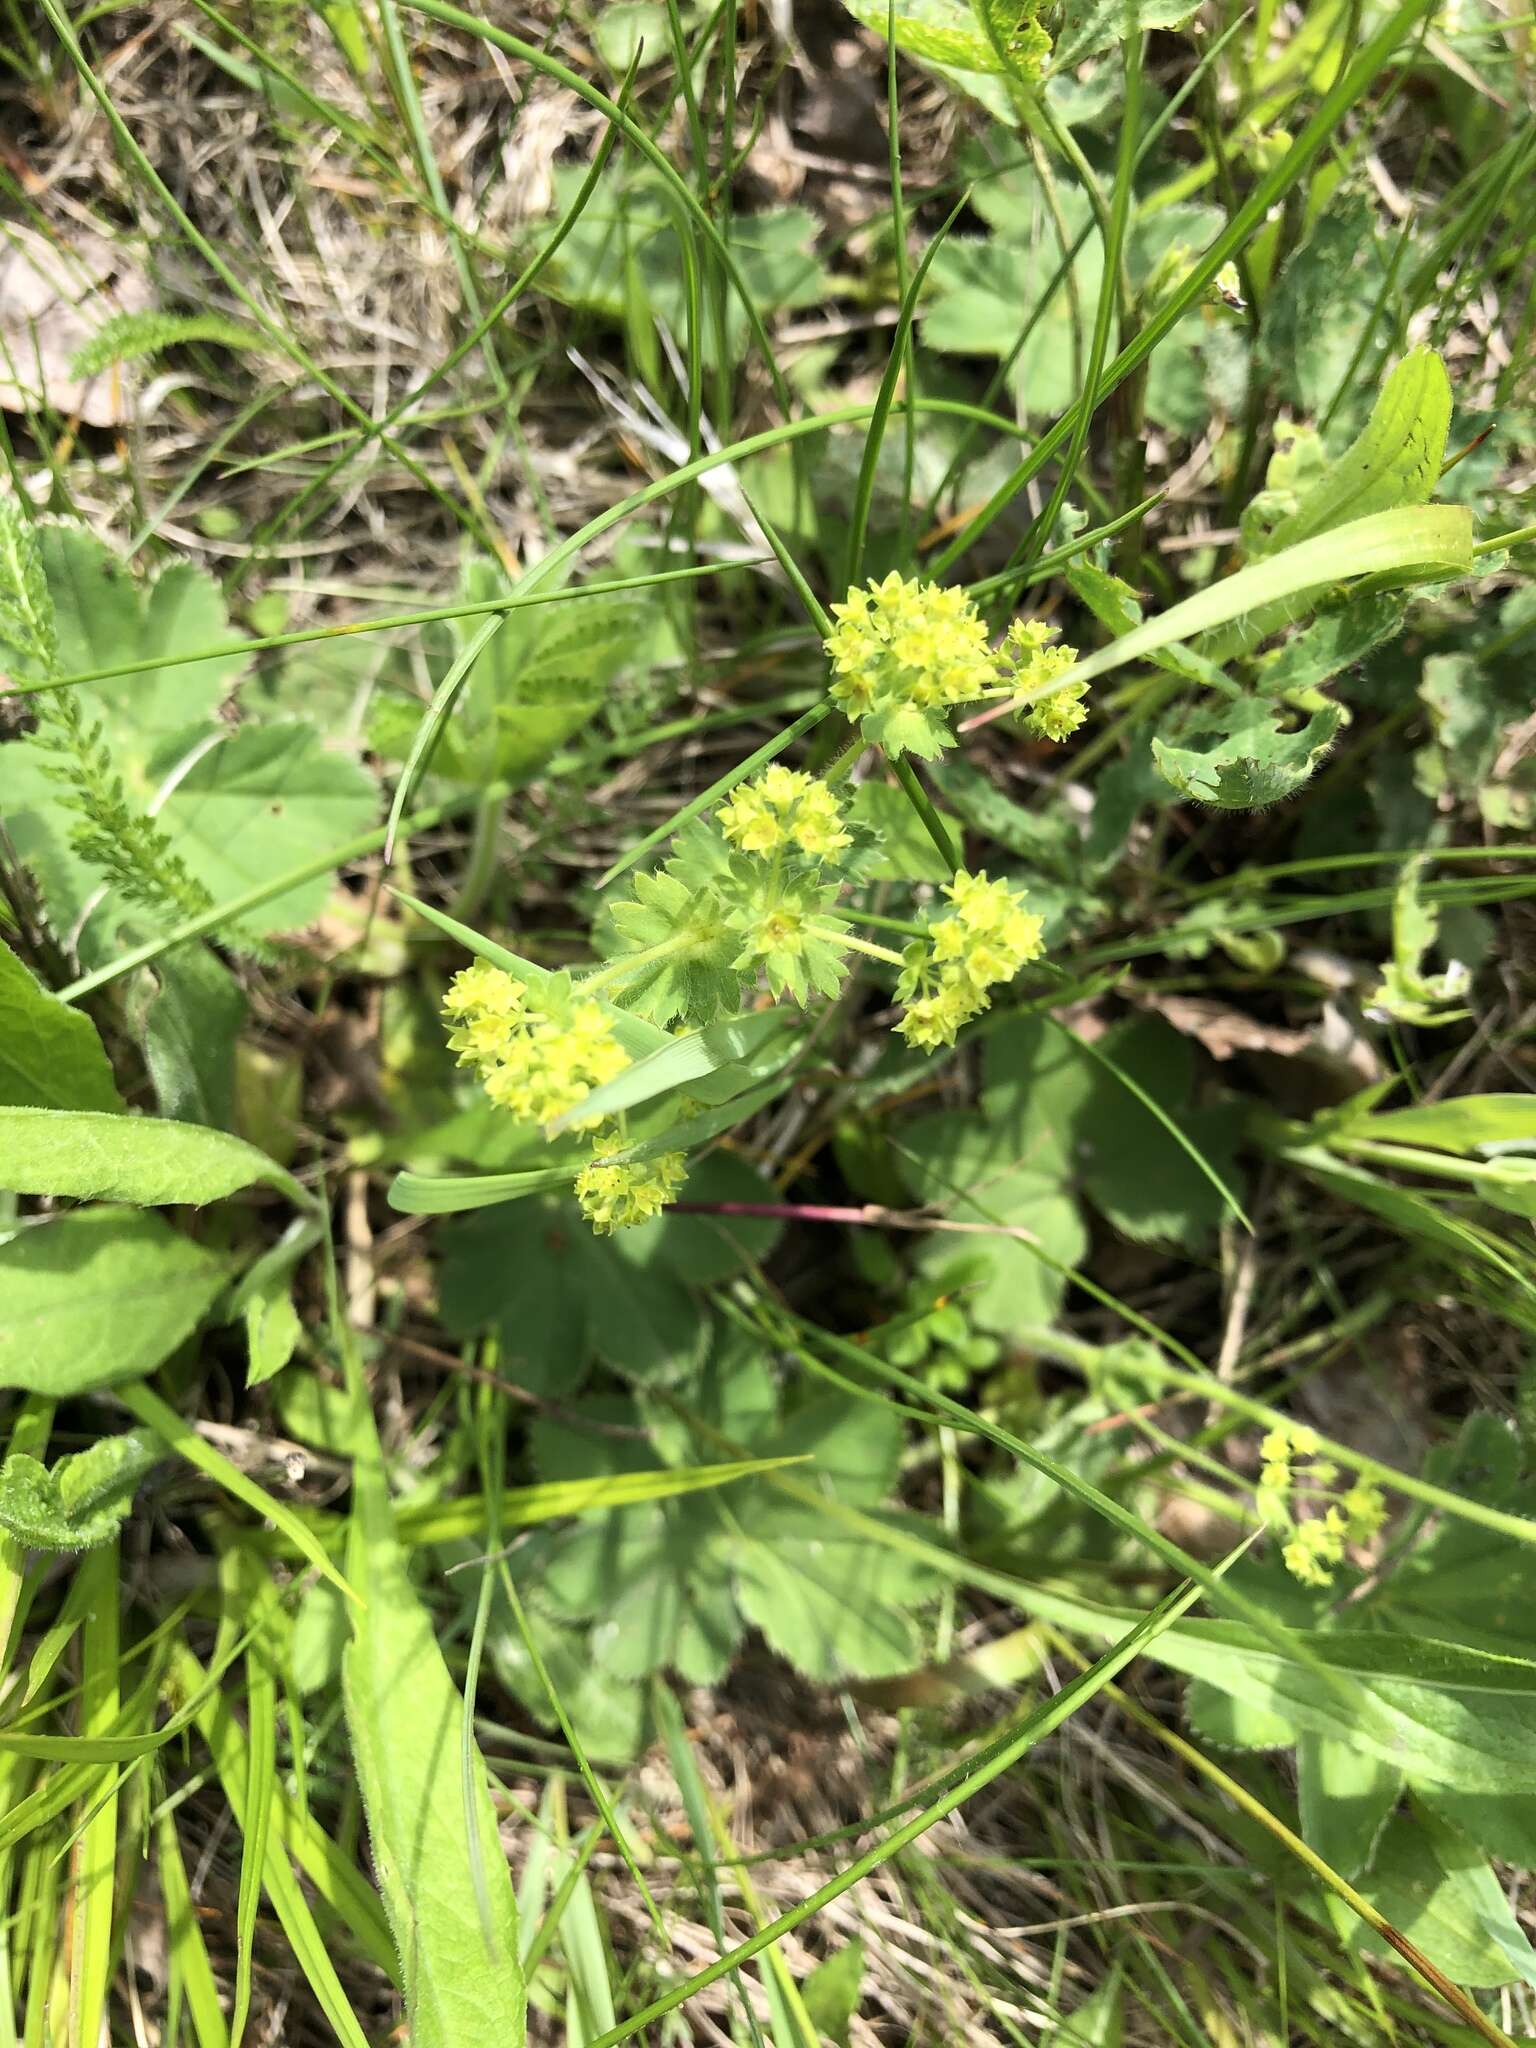 Image of hairy lady's mantle